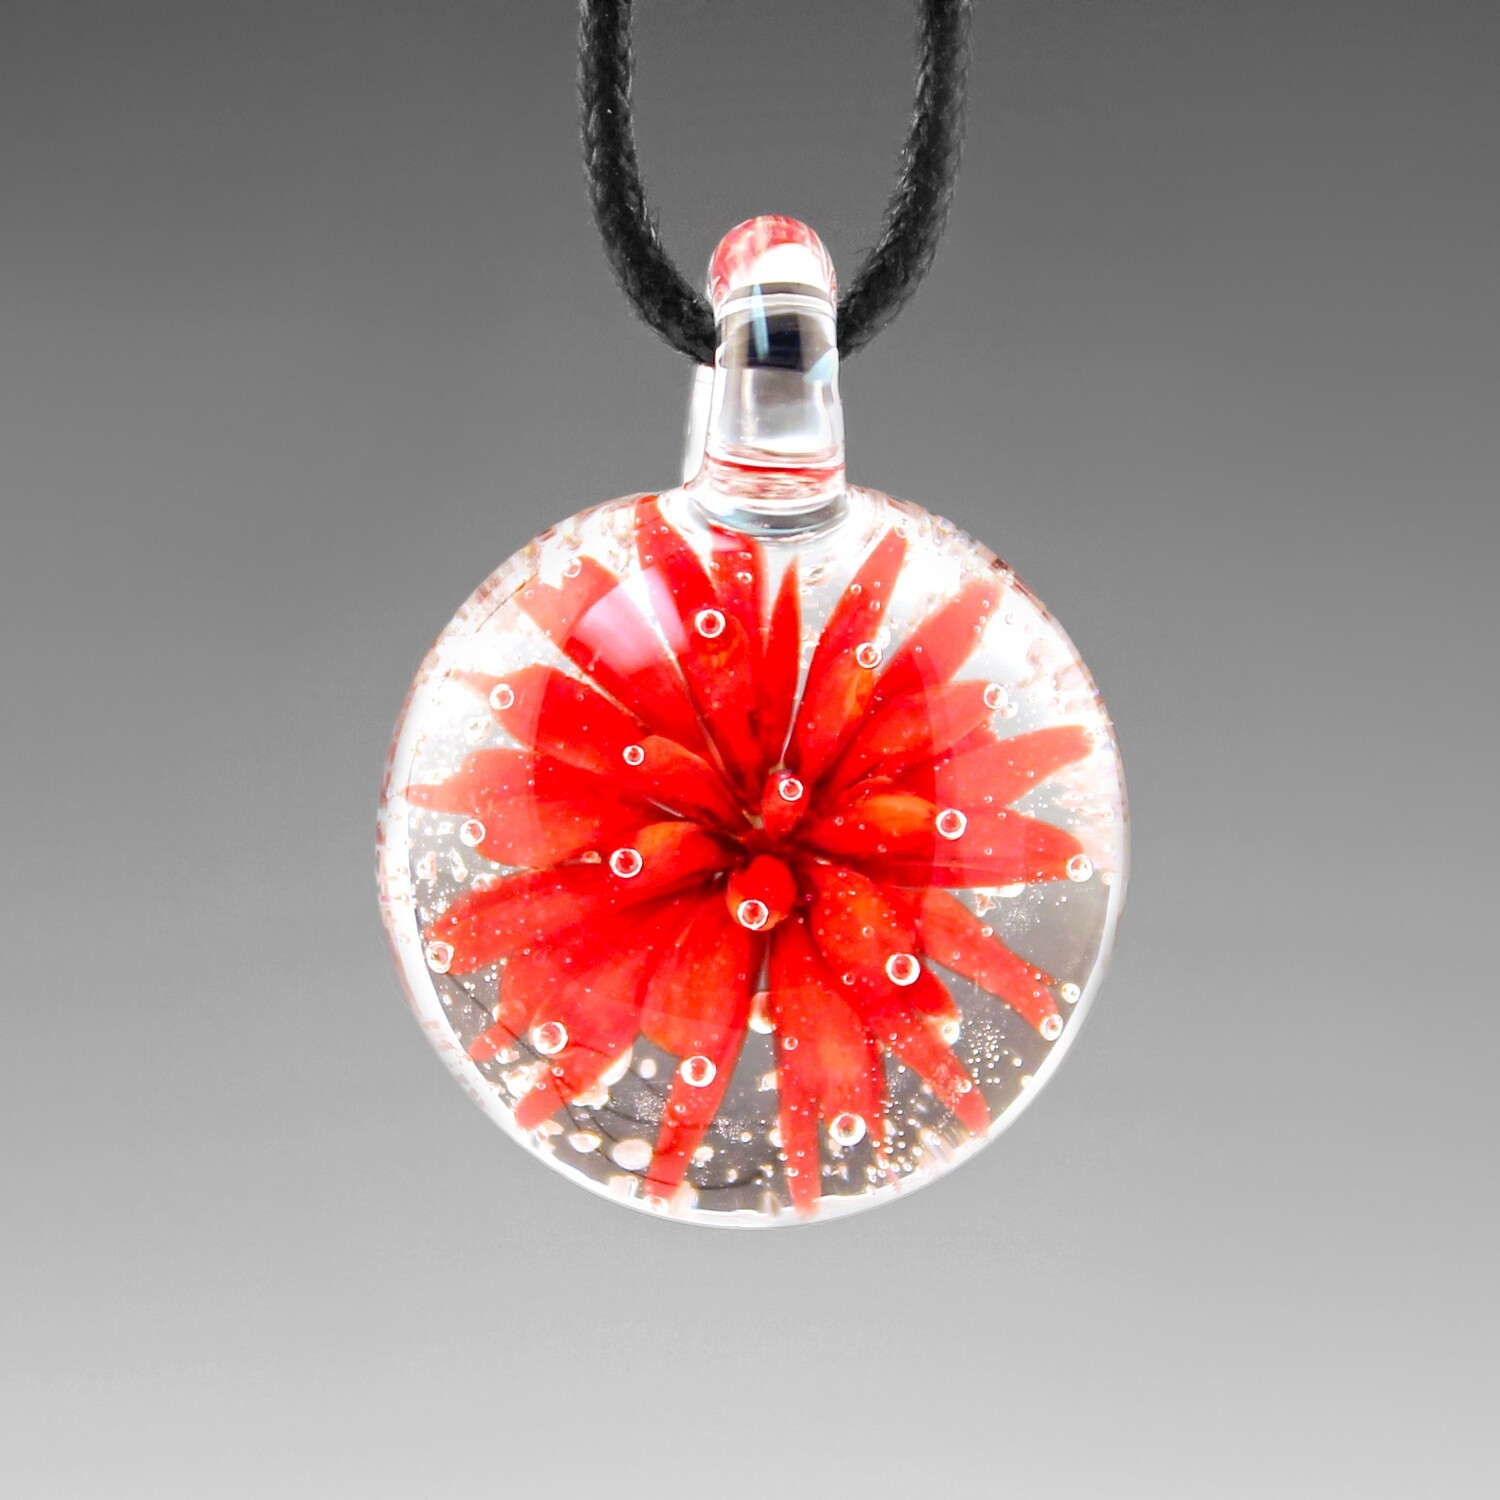 Sea Urchin Pendant with Cremated Remains